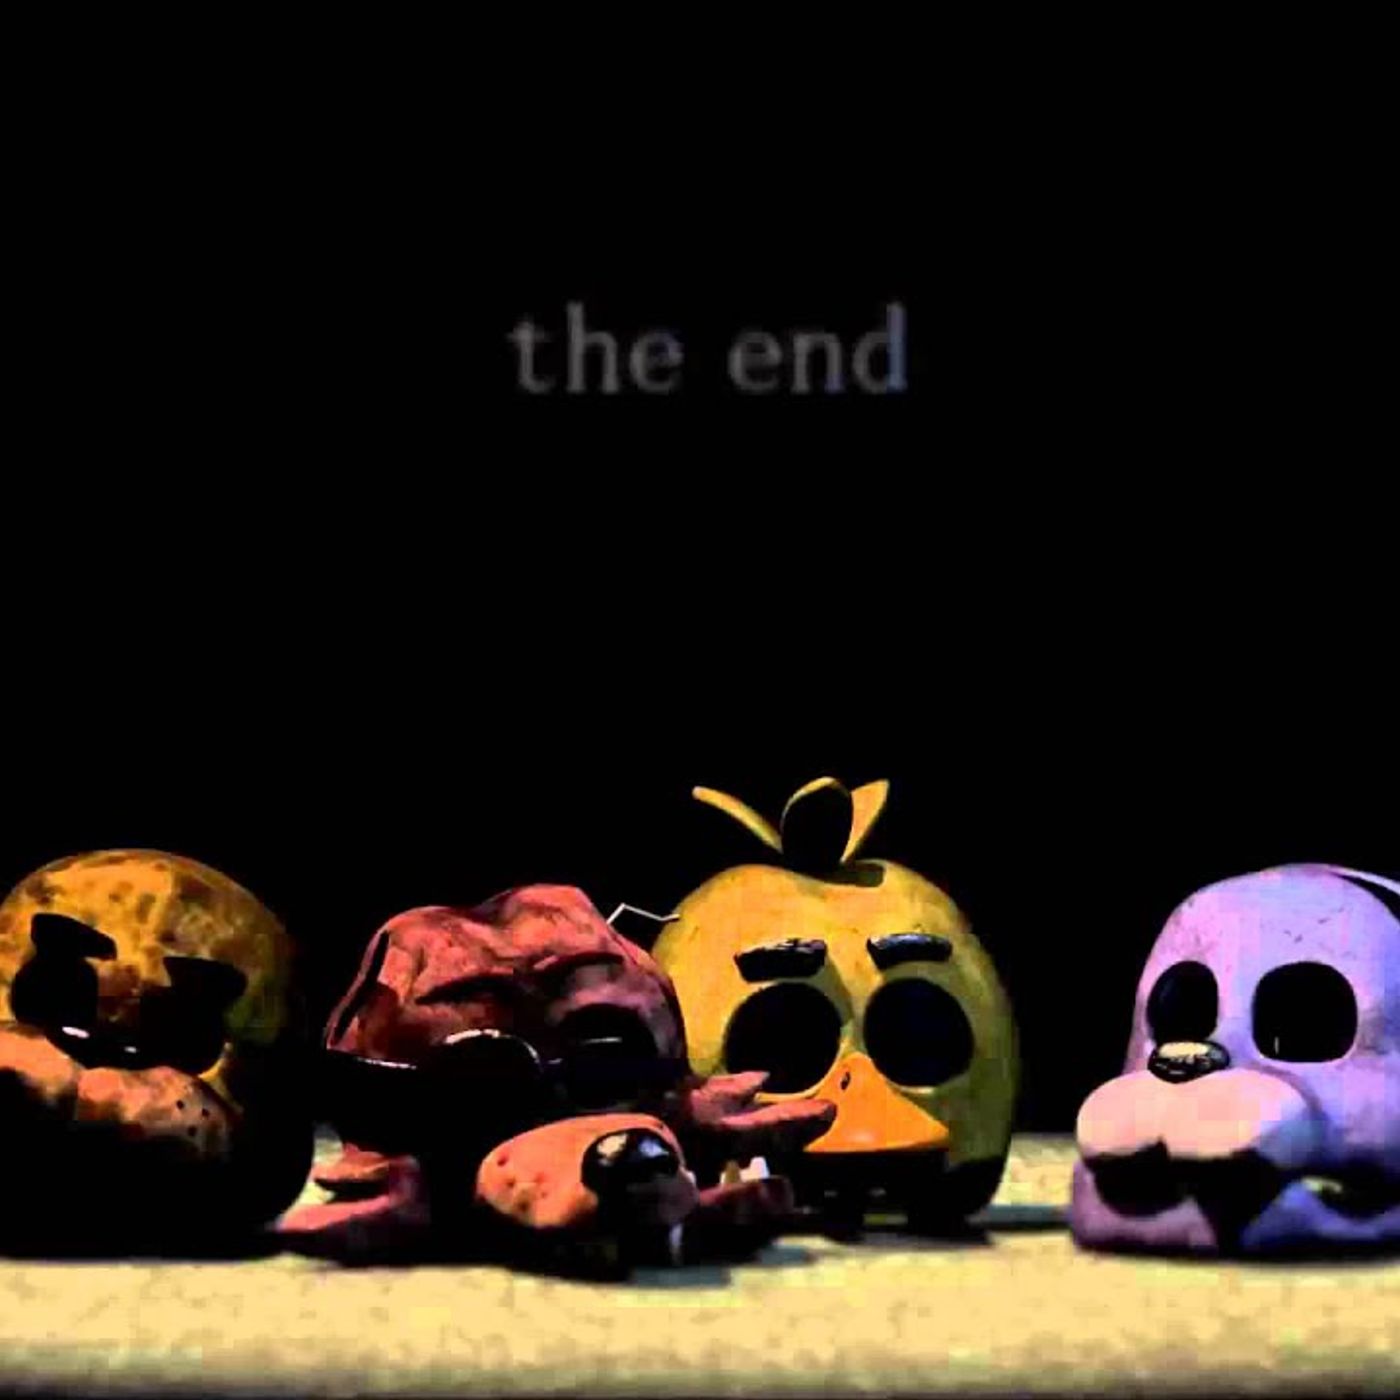 Five Nights at Freddy's: Let's Pod Episode 1 (The Beginning)